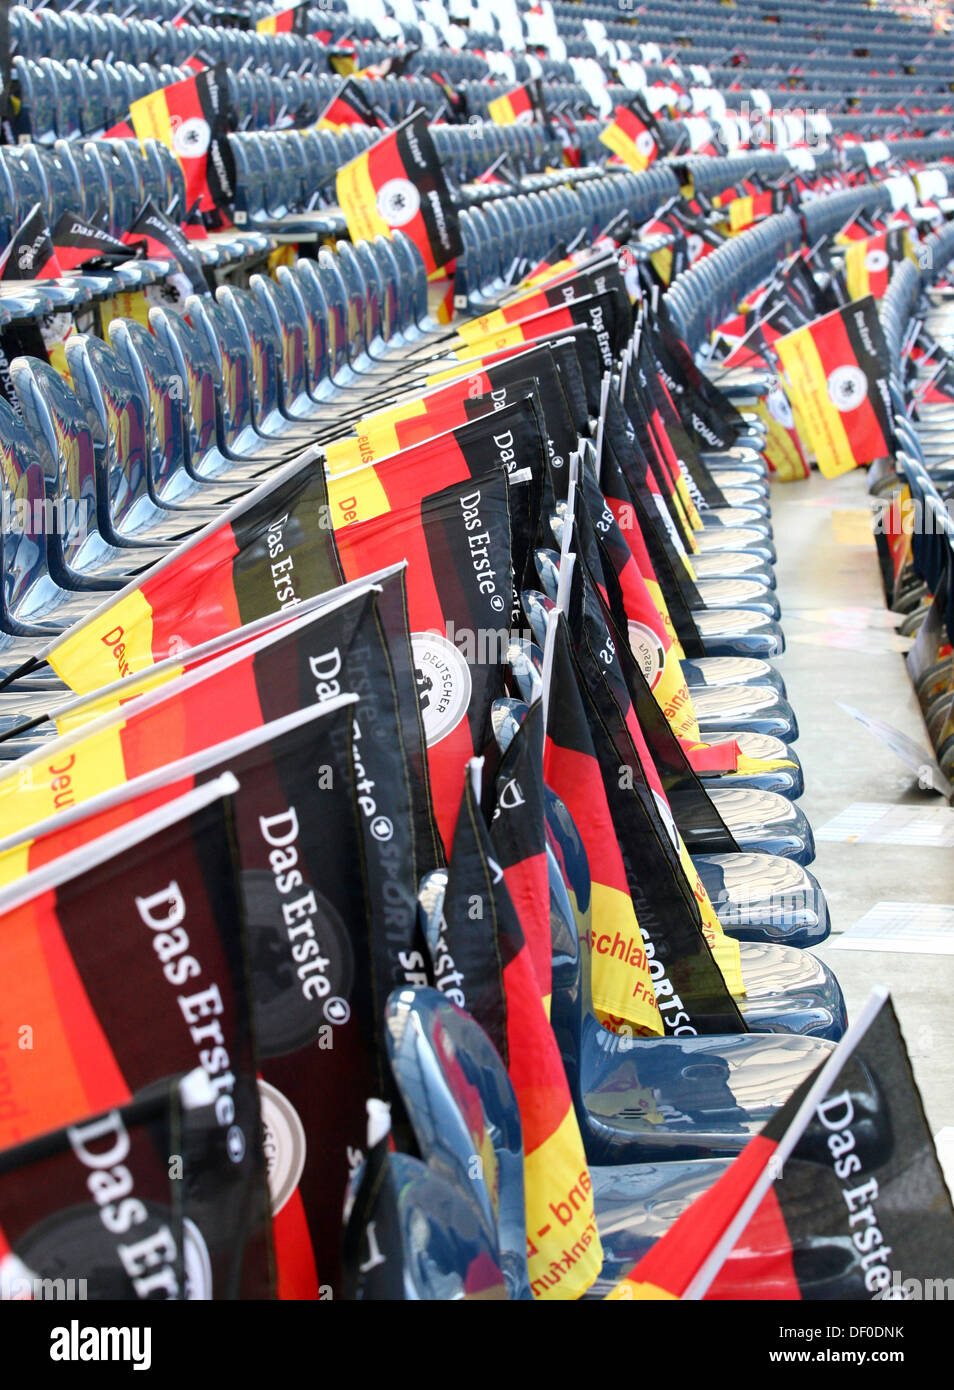 German flags on every seat in the football stadium Stock Photo